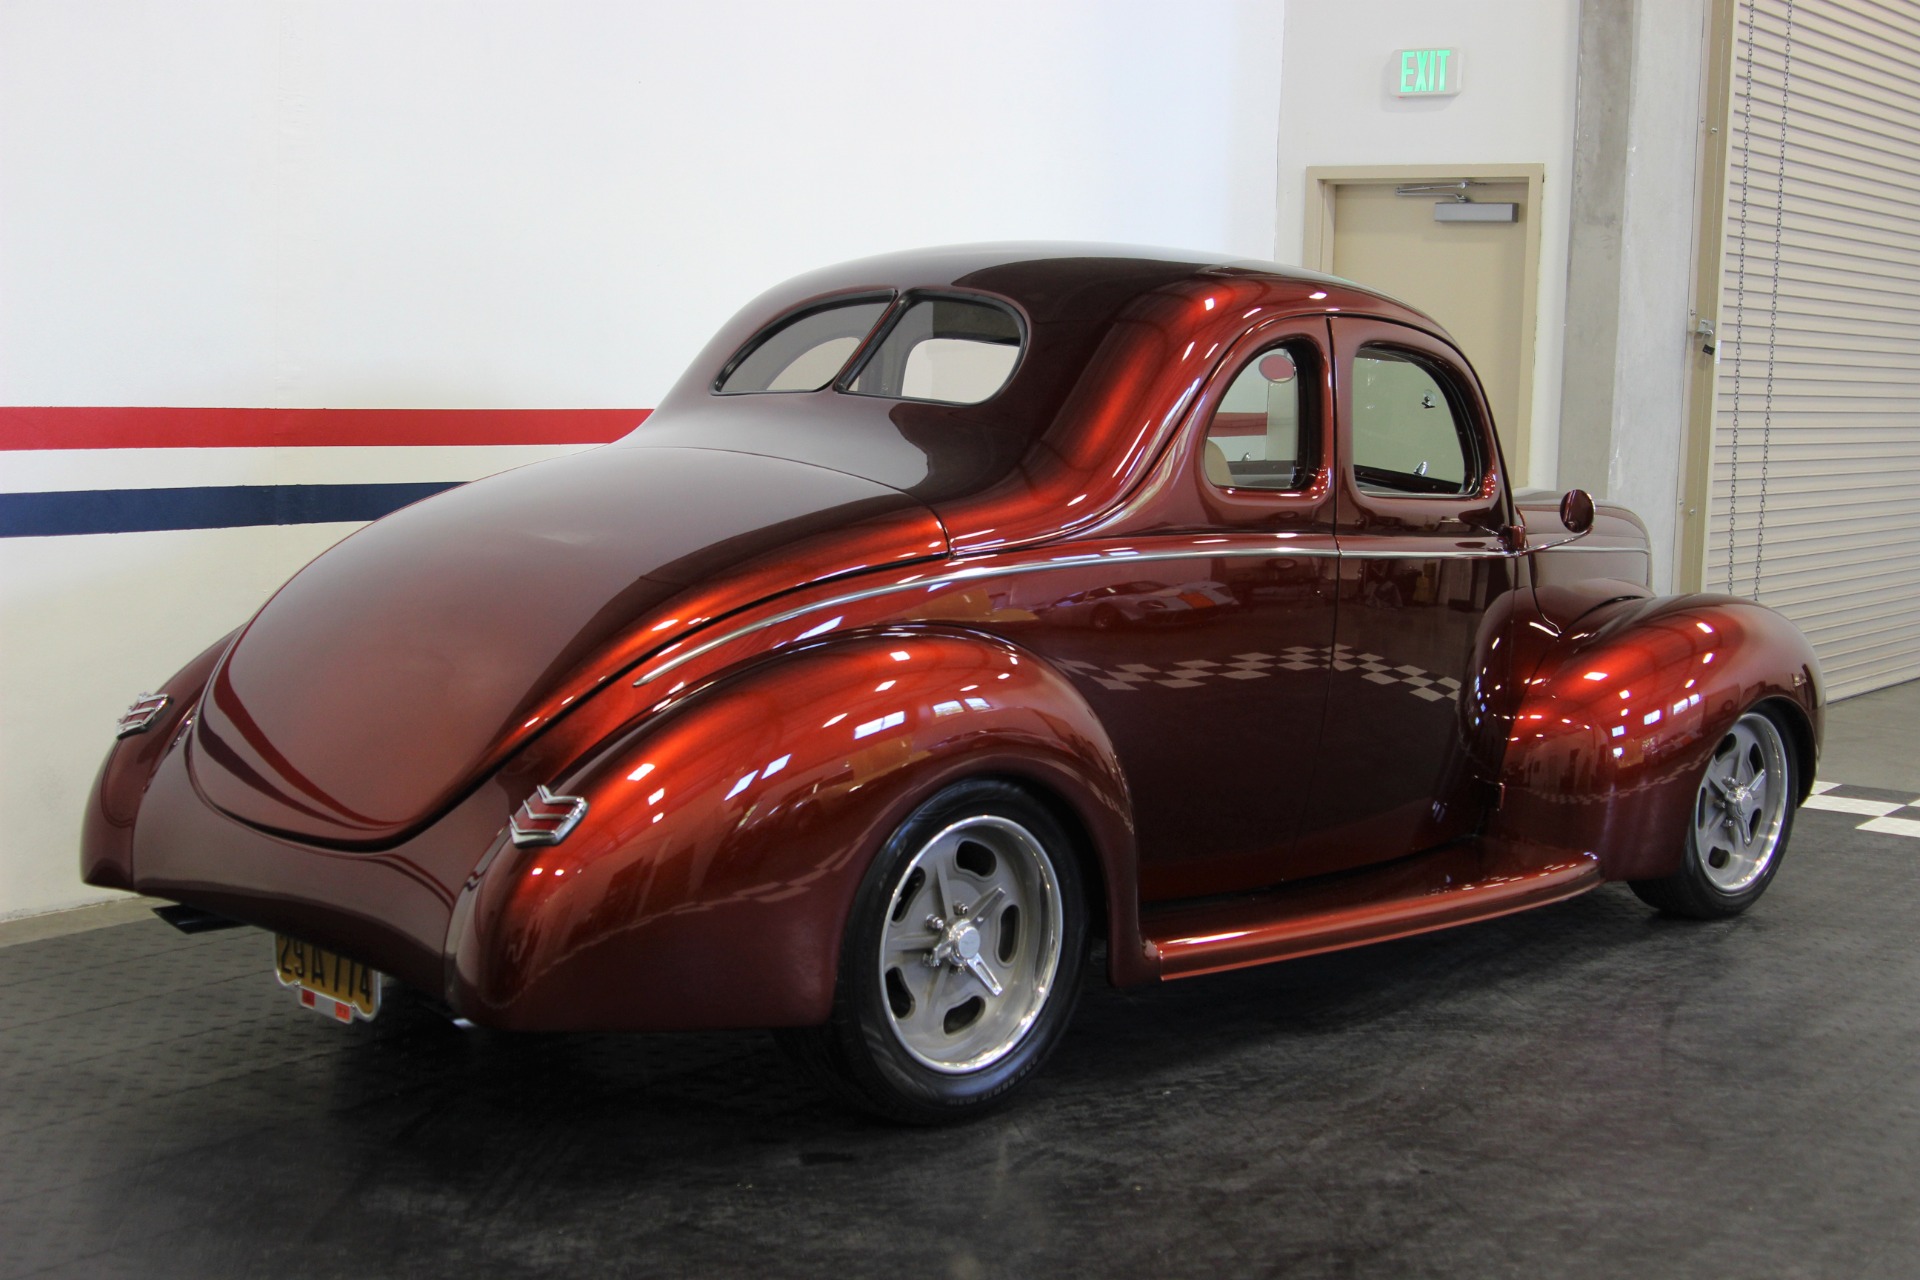 1940 Ford Coupe Stock 18094 For Sale Near San Ramon Ca Ca Ford Dealer